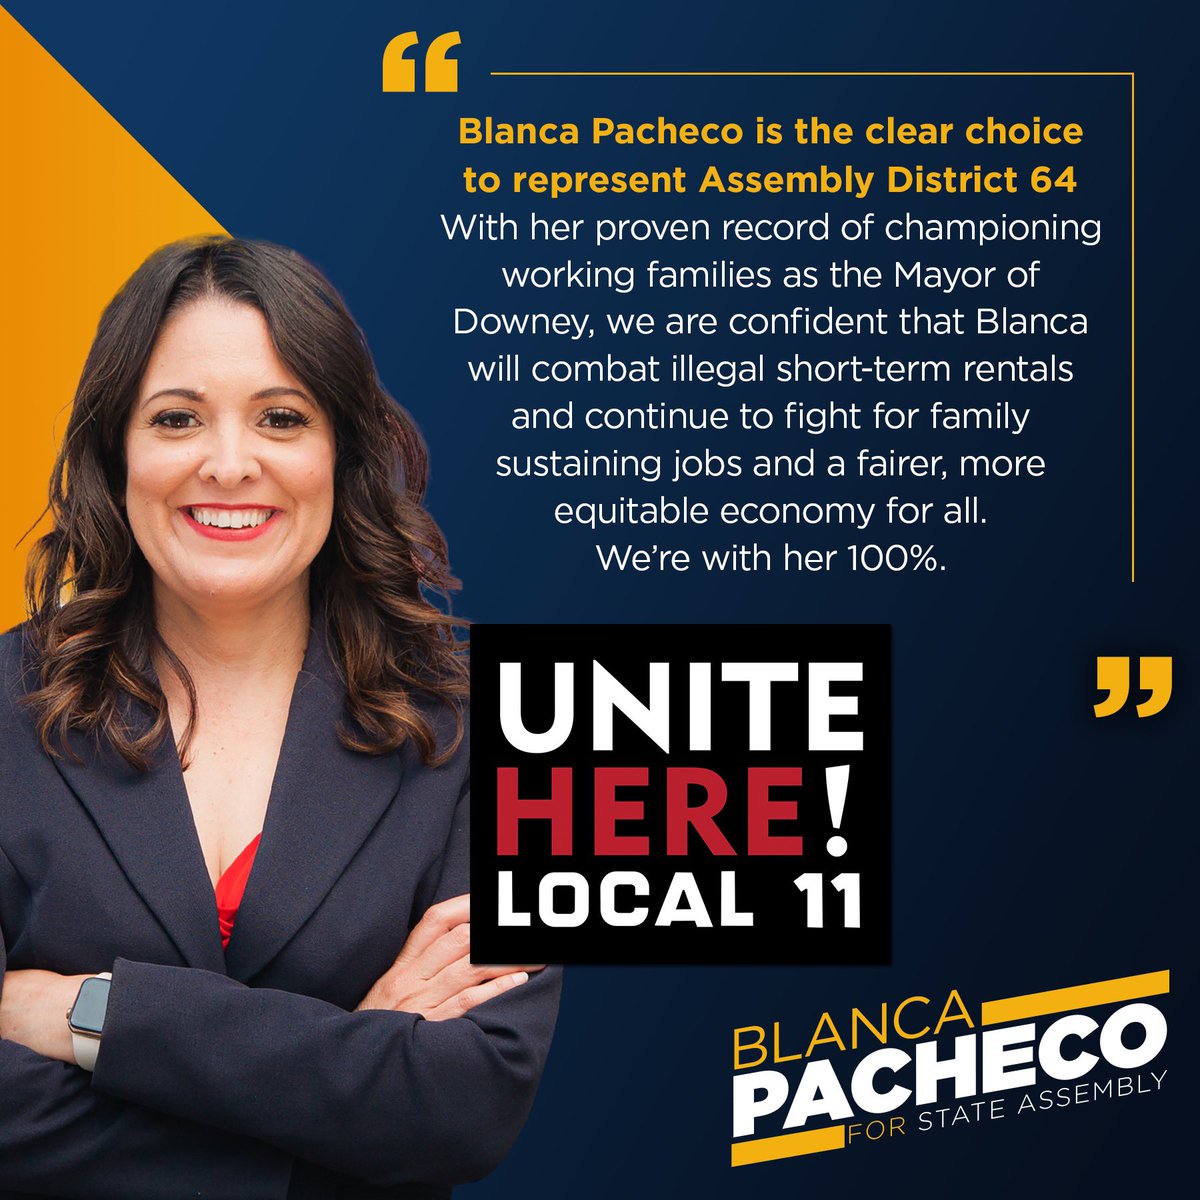 Thank you UNITE HERE! Local 11. I’m proud to have the support of working women and men and look forward to being a strong partner in the Assembly. #UniteHereLocal11